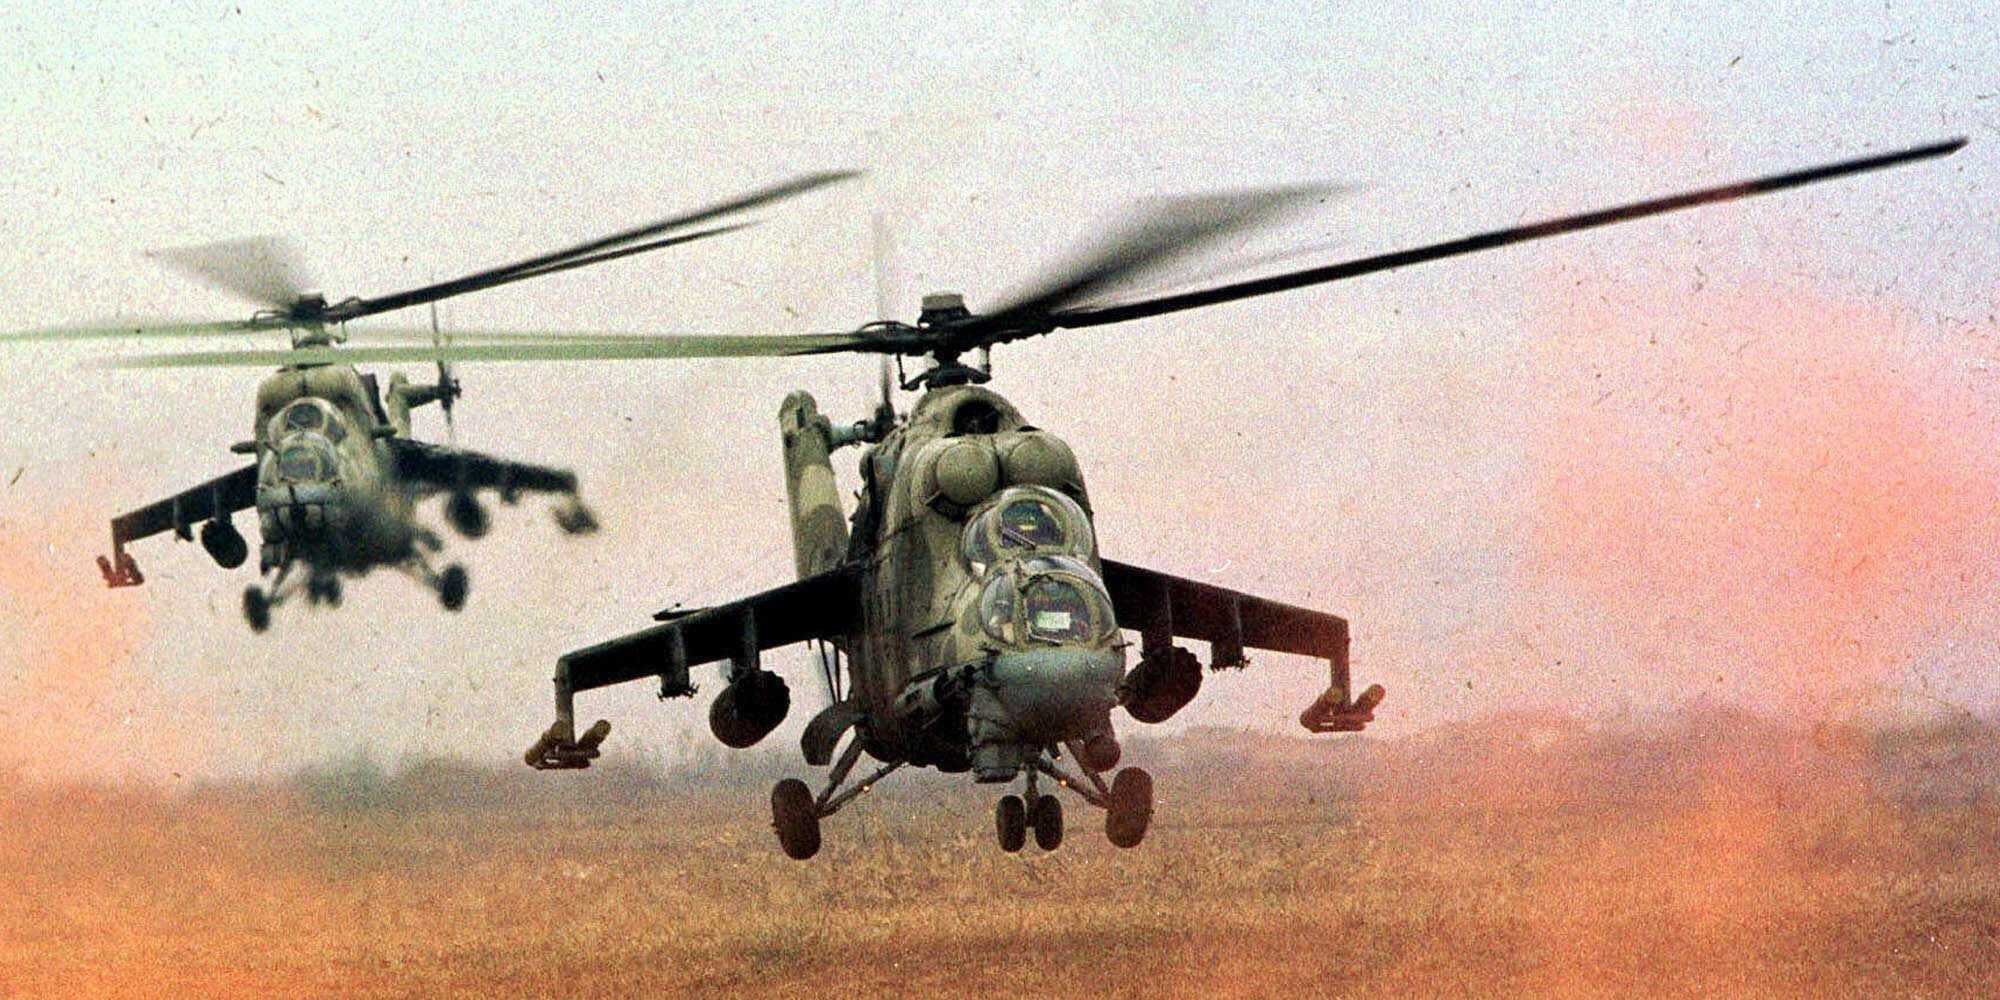 mi 24, Hind, Gunship, Russian, Russia, Military, Weapon, Helicopter, Aircraft,  1 Wallpaper